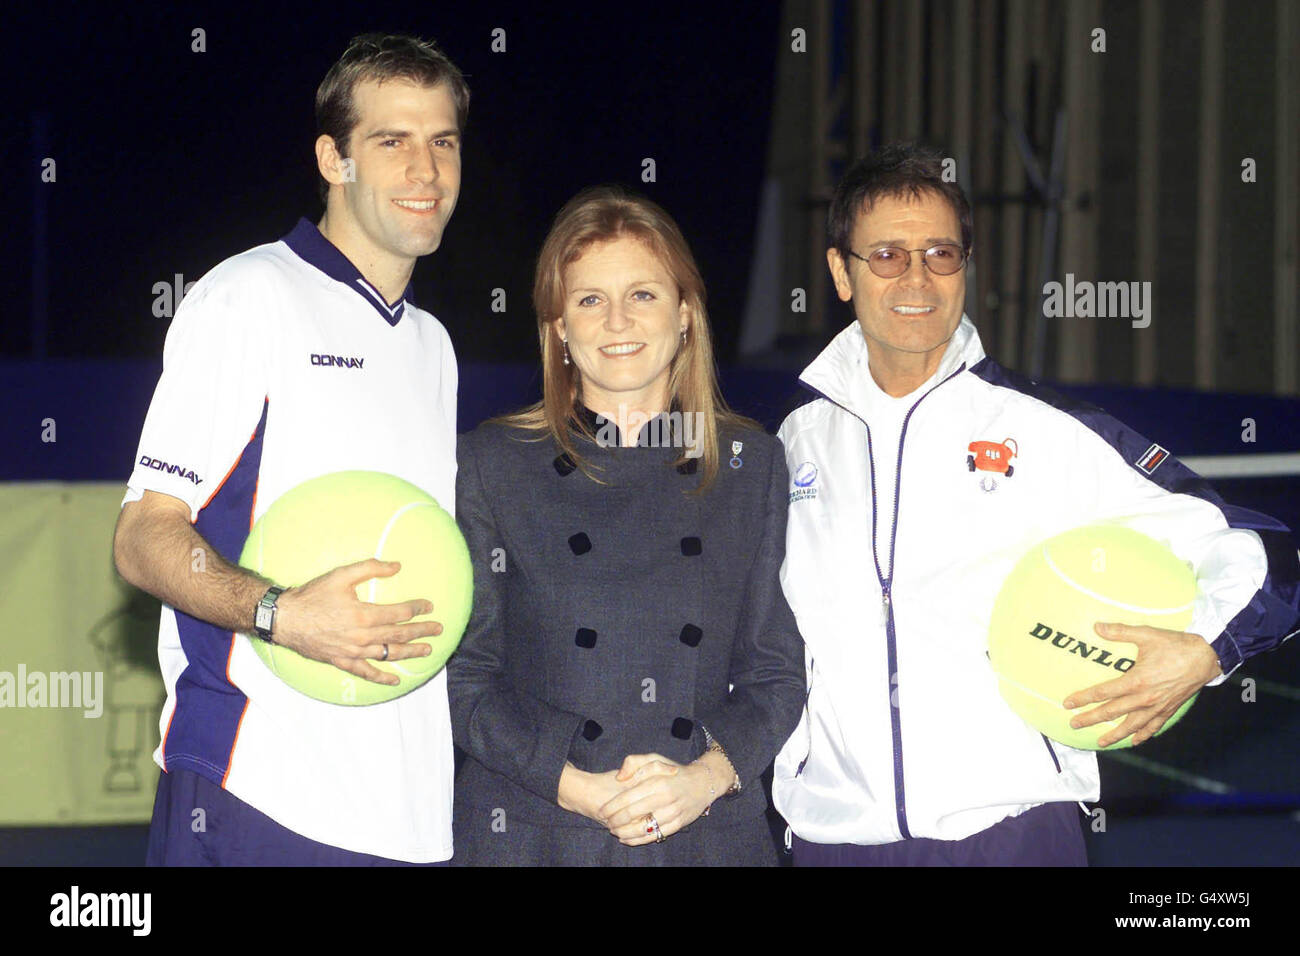 The Duchess of York, Sarah Ferguson, with British tennis player Greg Rusedski (left) and singer Sir Cliff Richard at The London Arena in Docklands for the York tennis challenge cup for the charity Children in Crisis. Stock Photo